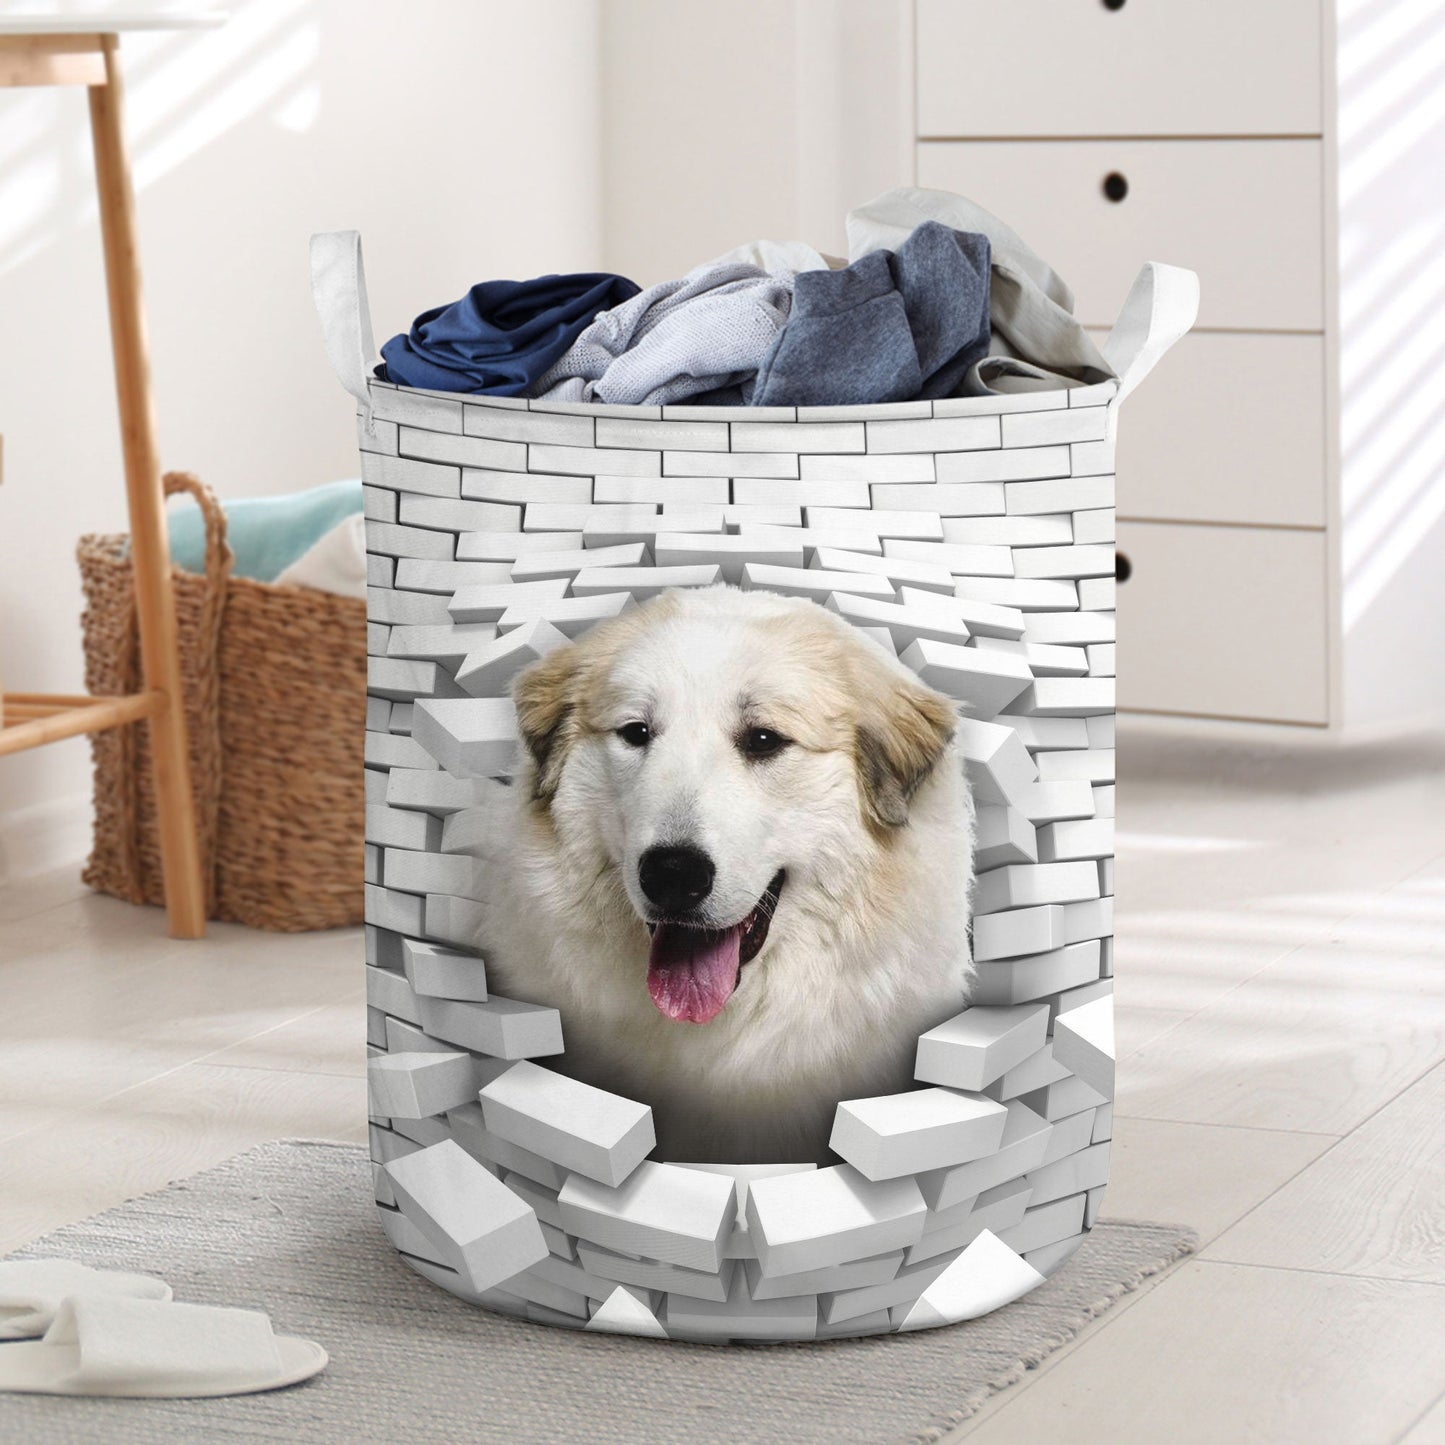 Pyrador - In The Hole Of Wall Pattern Laundry Basket